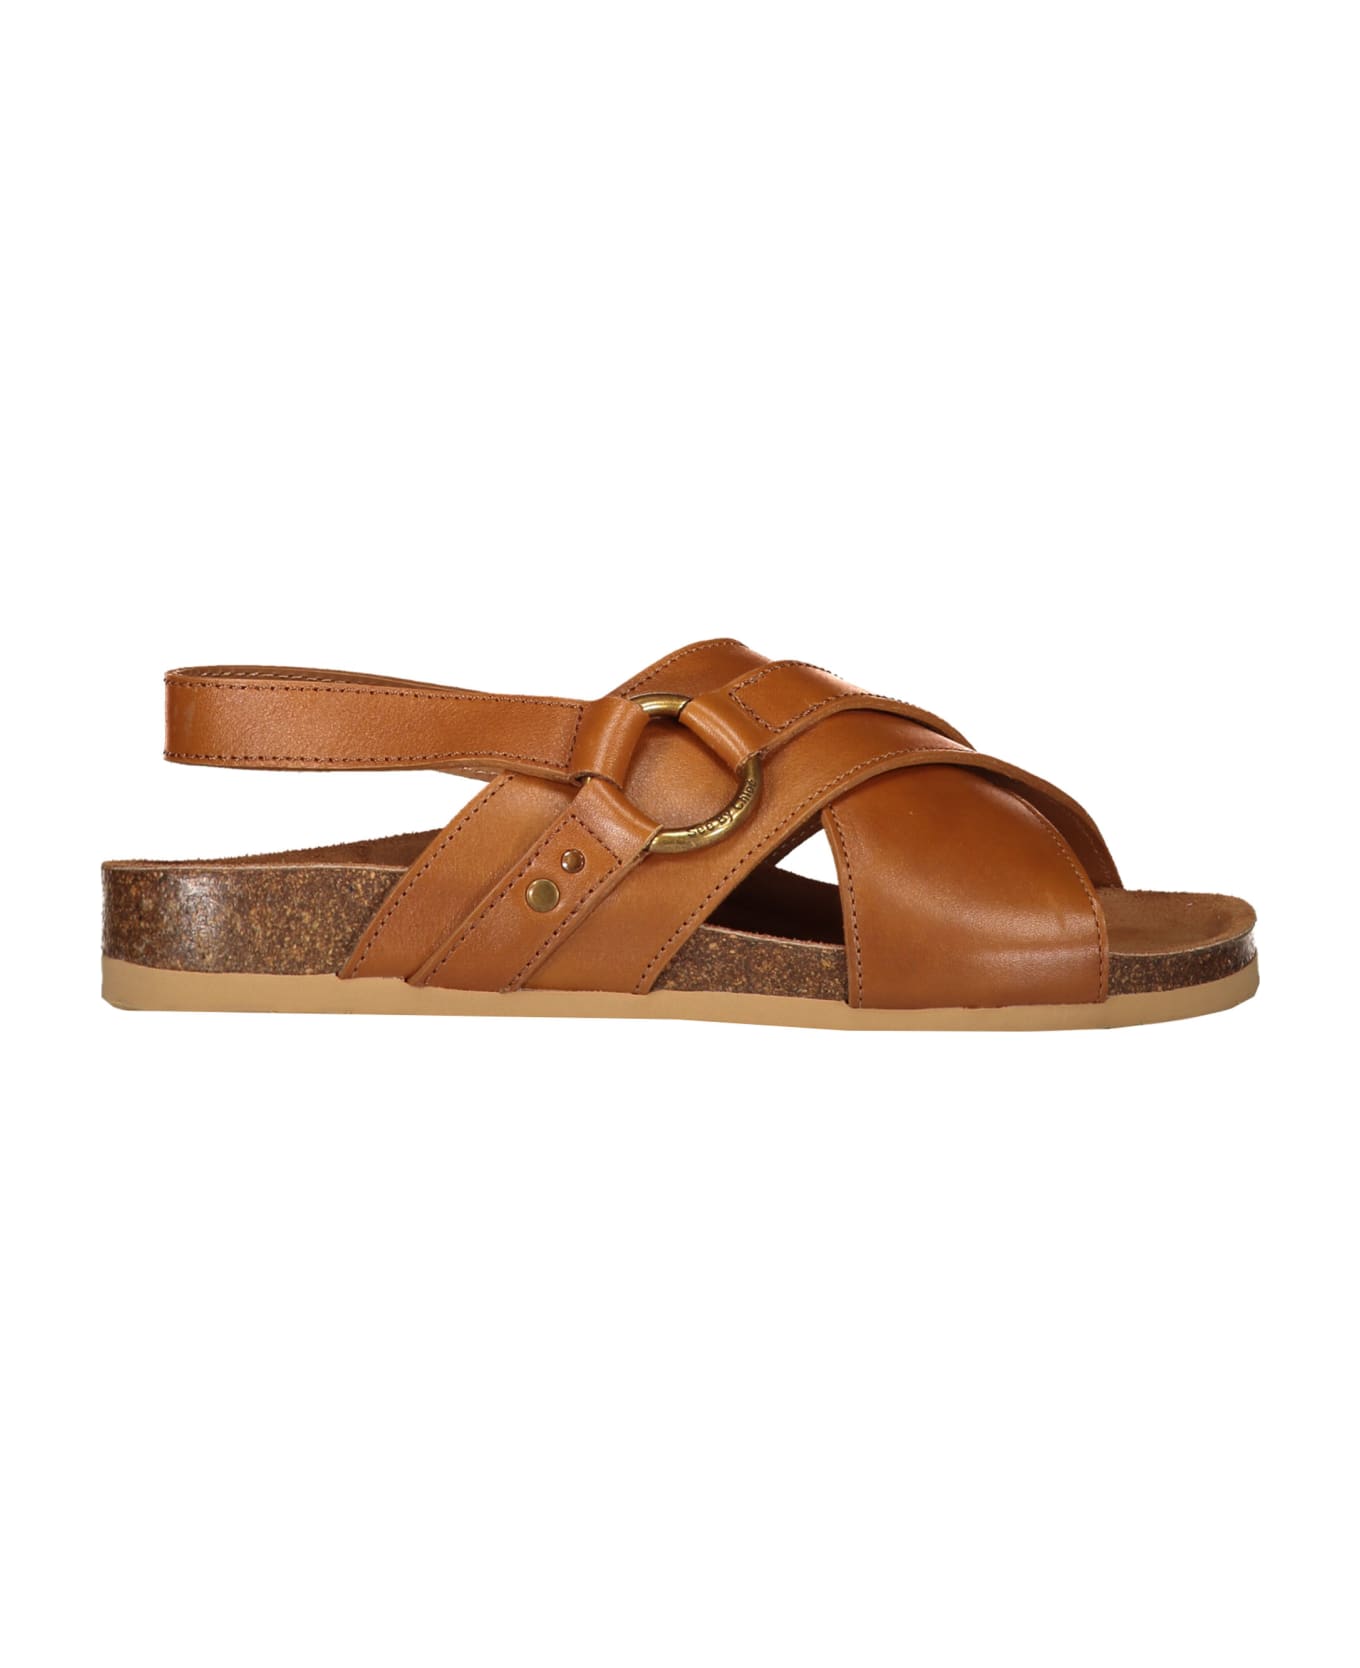 See by Chloé Leather Sandals - brown サンダル